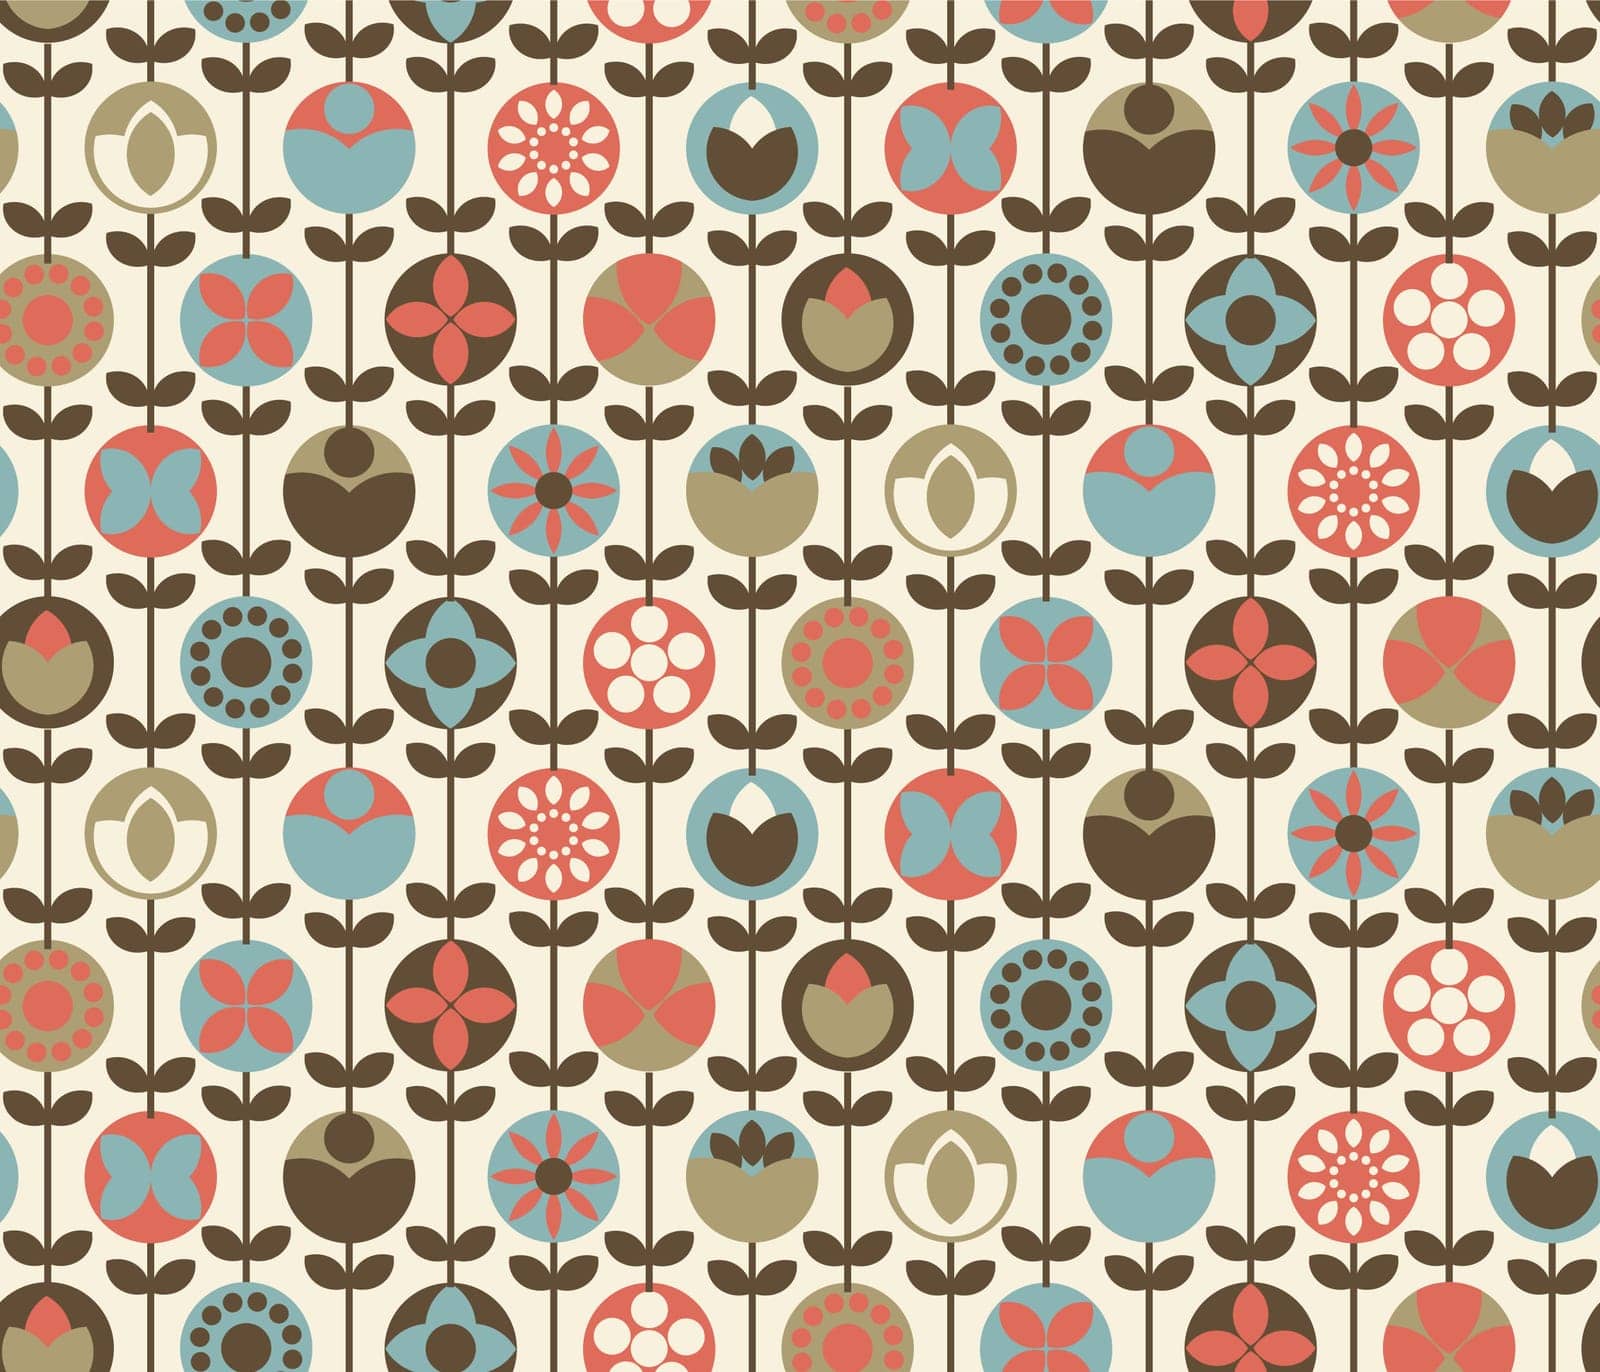 Flowers in blossom, bouquets and branches with leaves. Fabric and texture, botany and floral decoration. Vintage or retro. Seamless pattern, background or print wallpaper. Vector in flat style